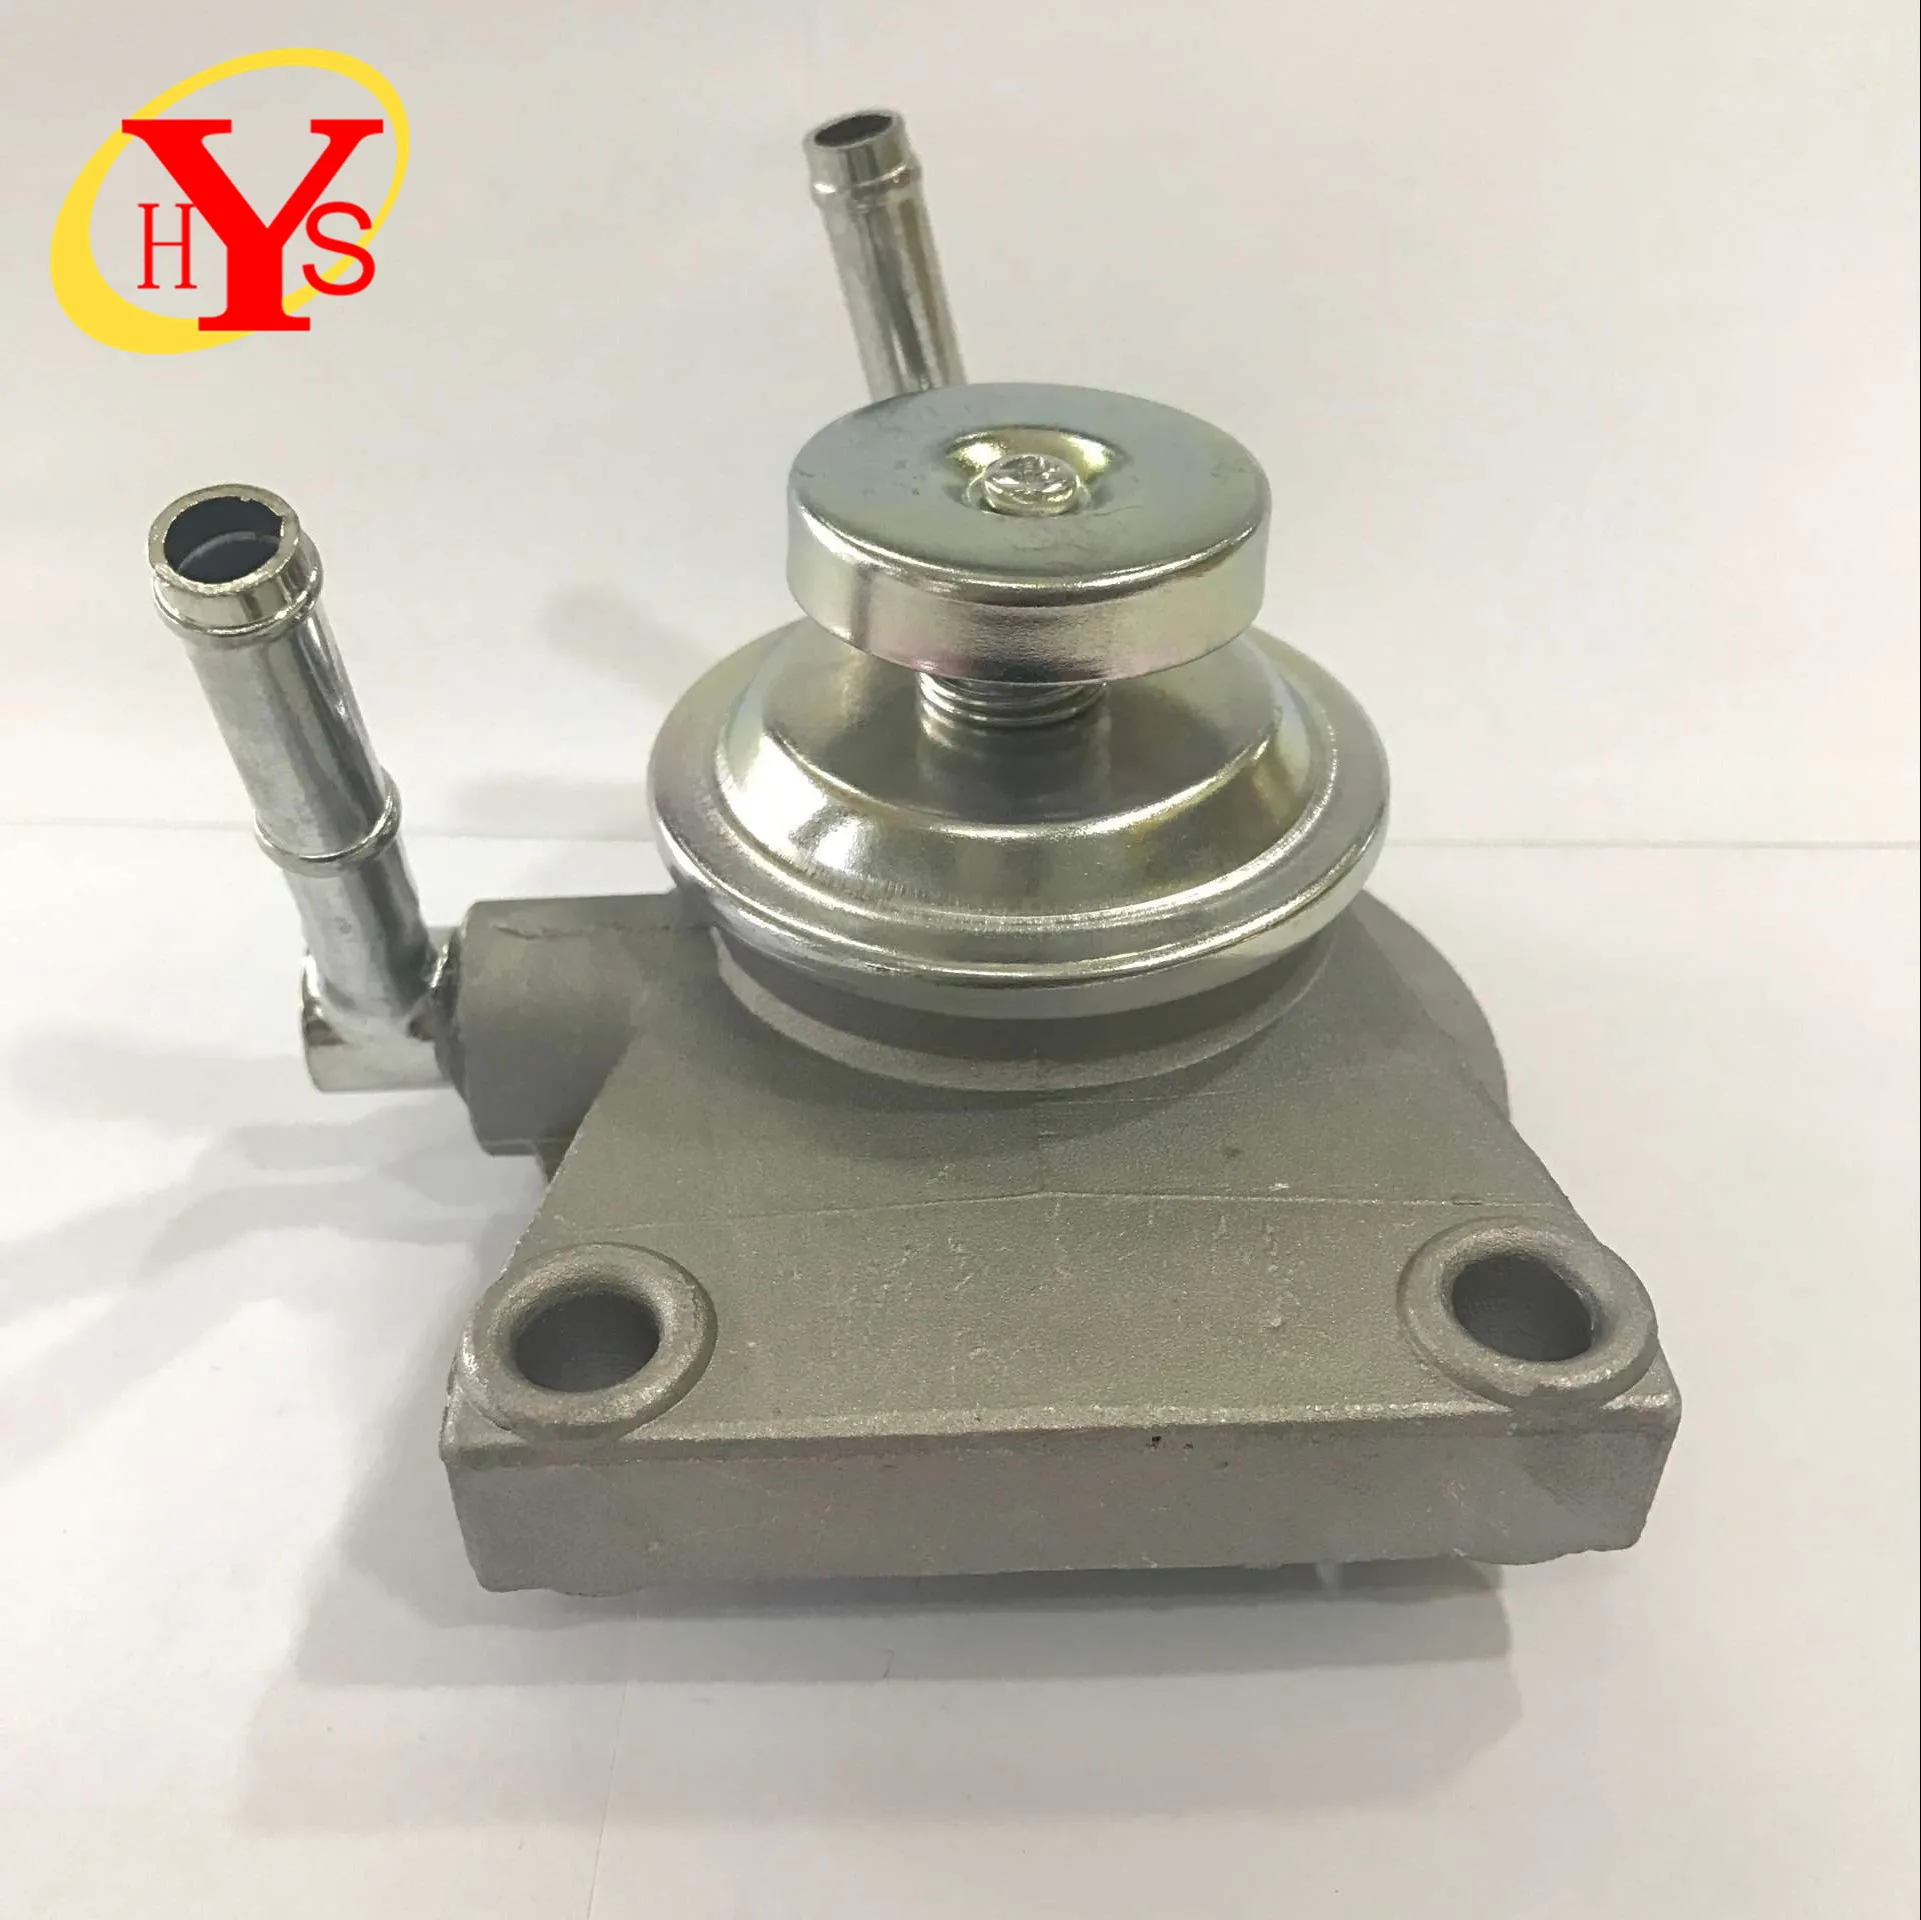 Feed pump, buy HYS-216 R best price pump cover upper lift pump filter head  Diesel SEDIMENTER FUEL PUMP for NISSAN 16401-43G0A on China Suppliers  Mobile - 167677587